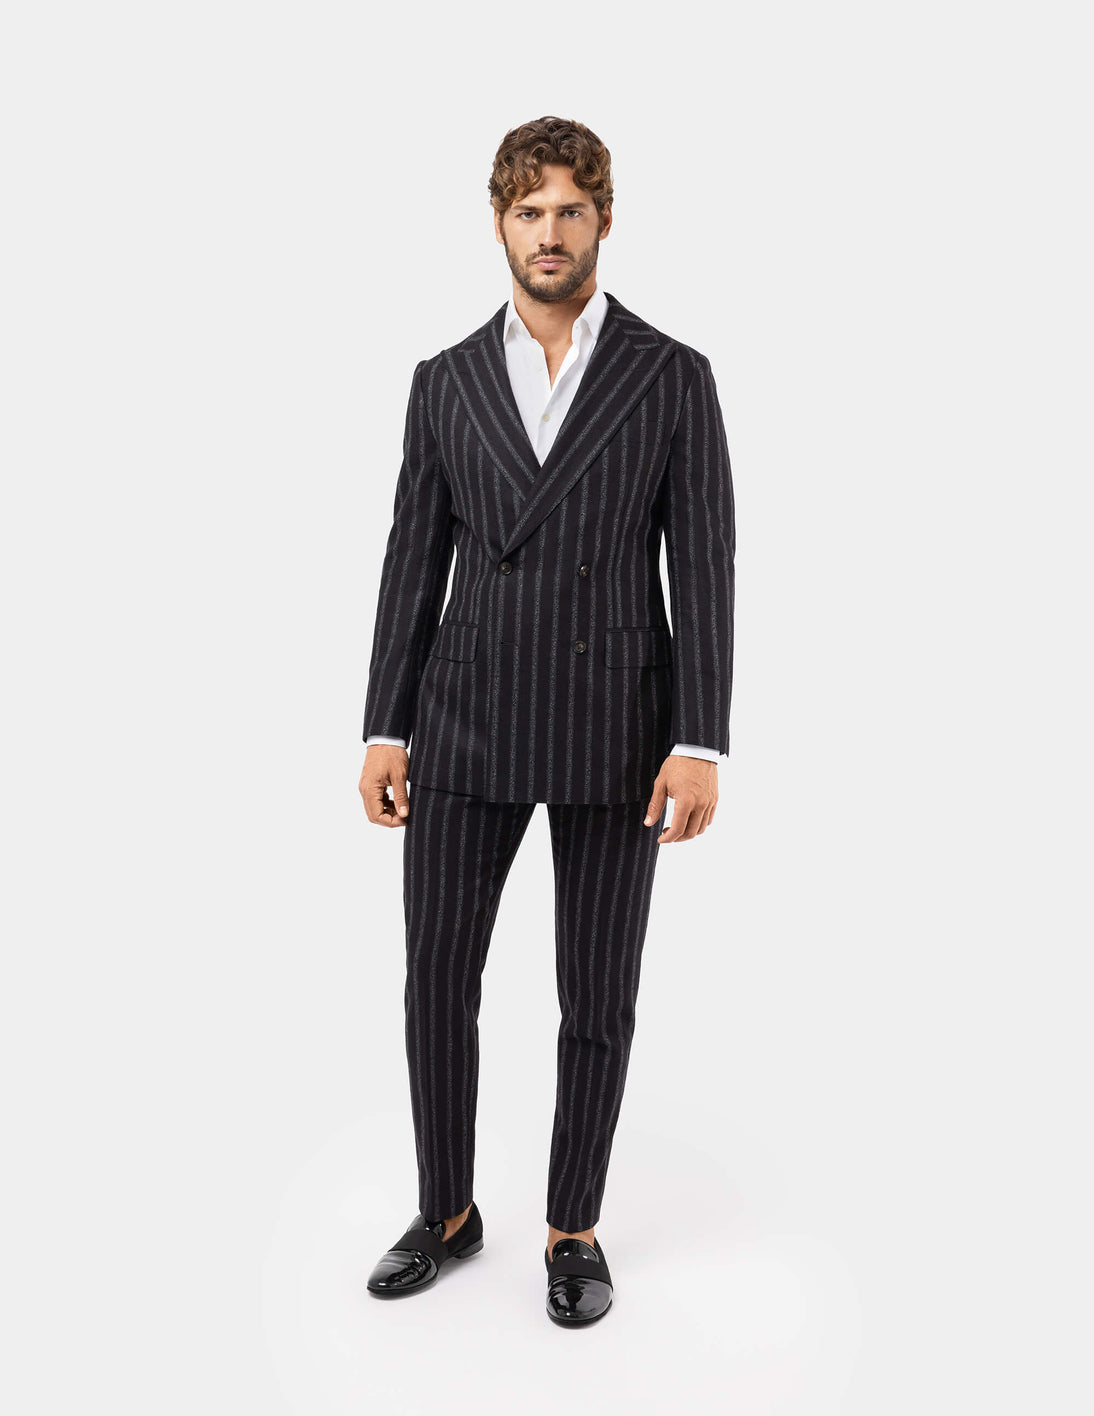 Black White Stripes Double Breasted Suit - Samir Bachkami